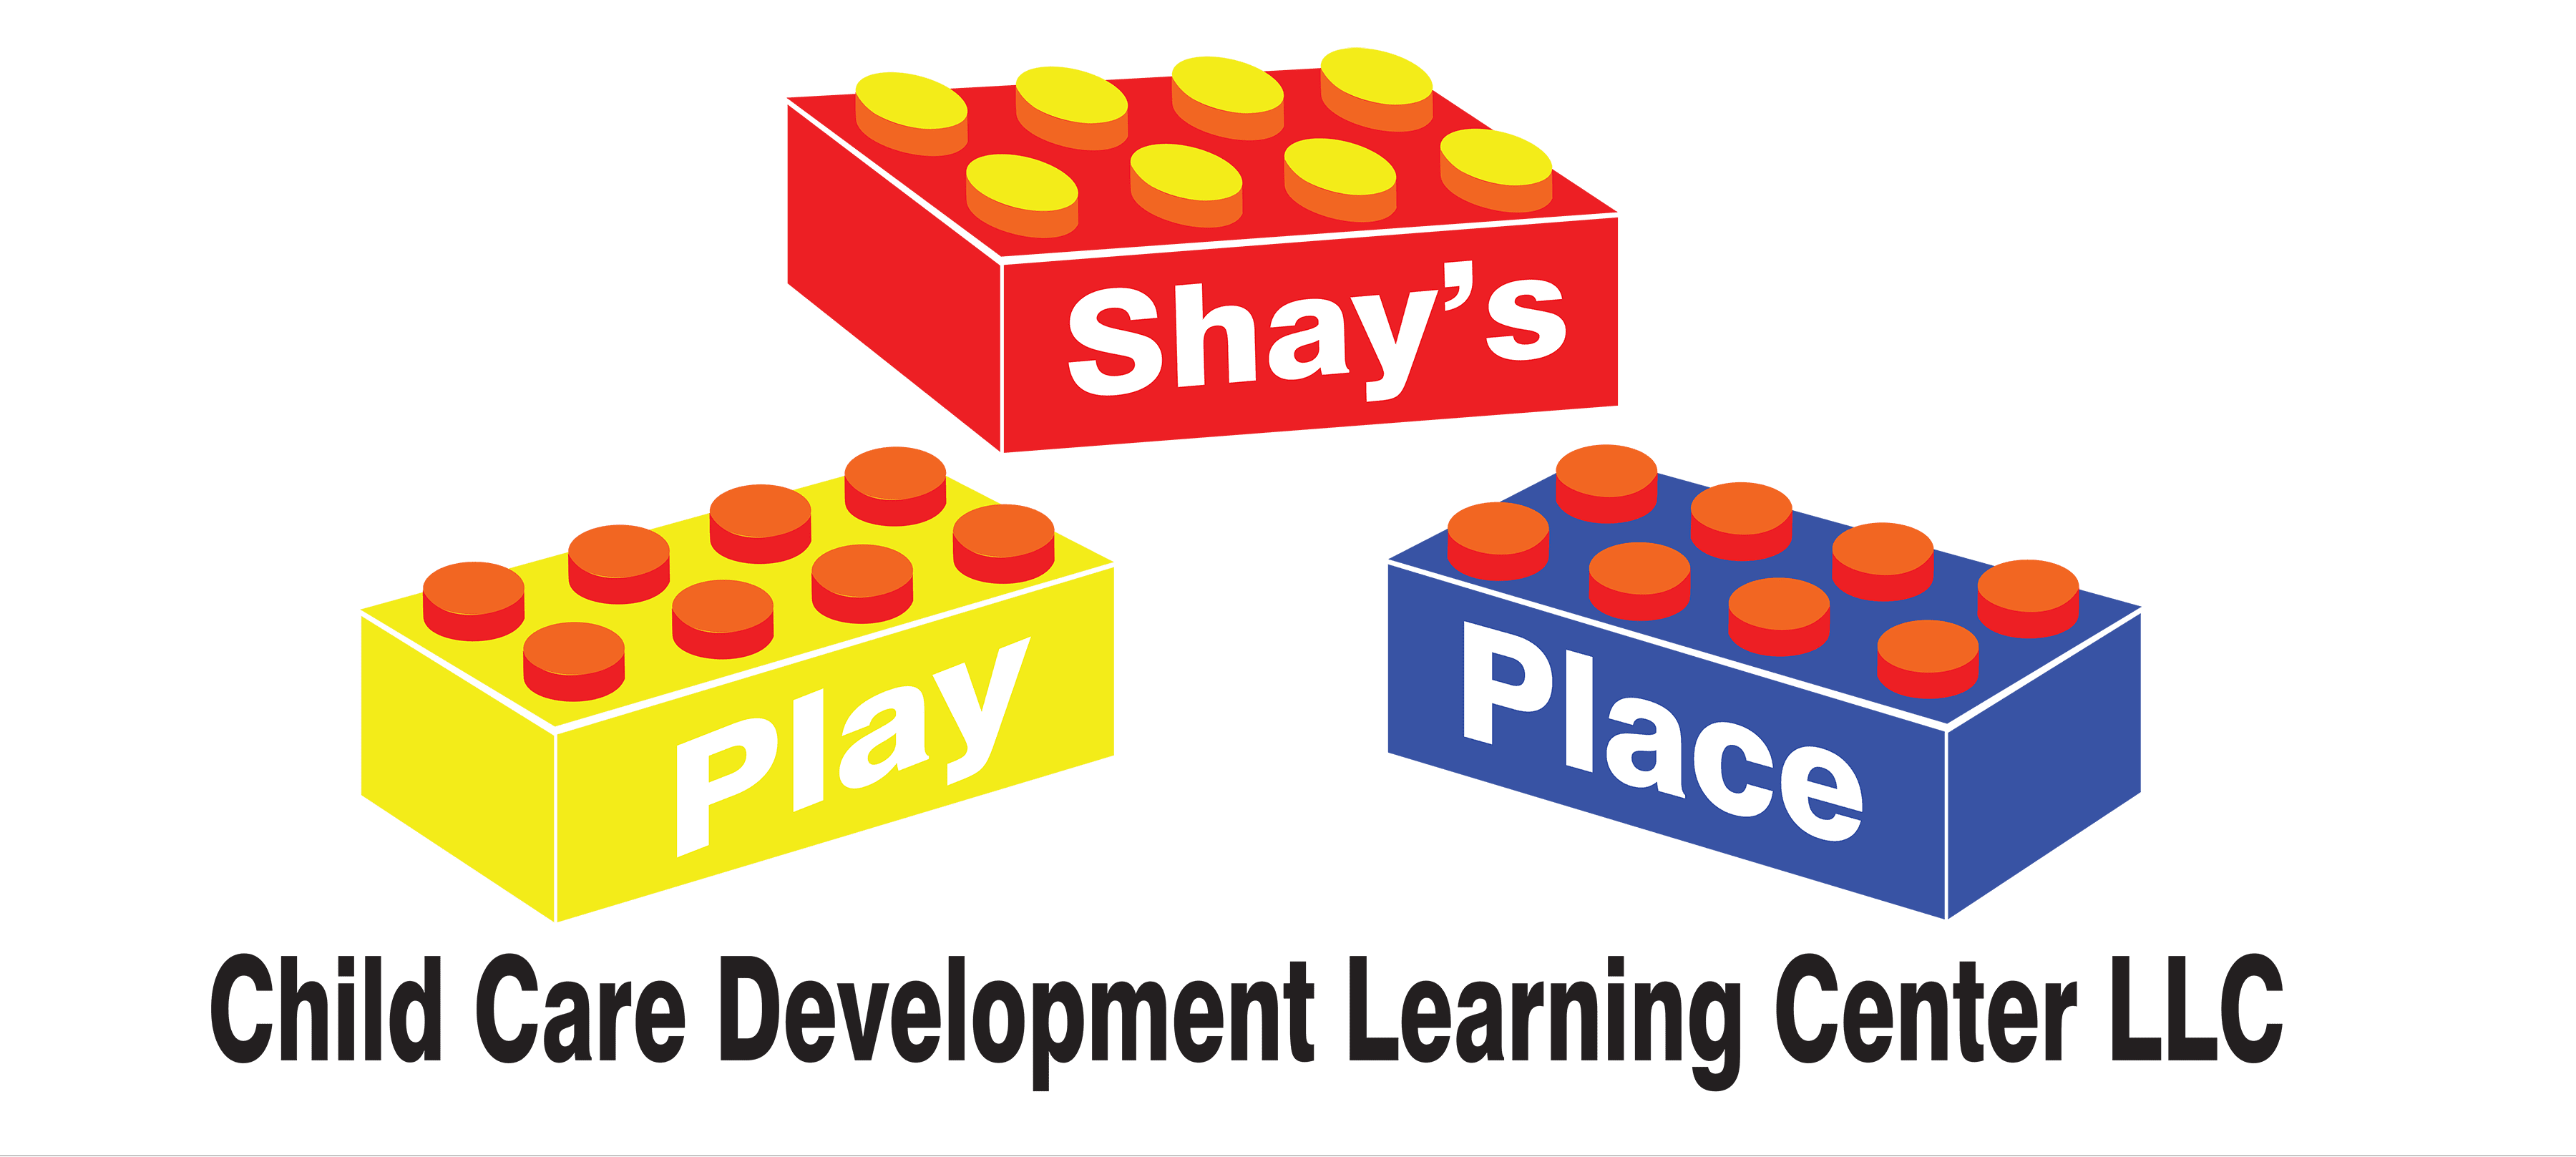 Shay's Play Place Child Care Development Learning Center